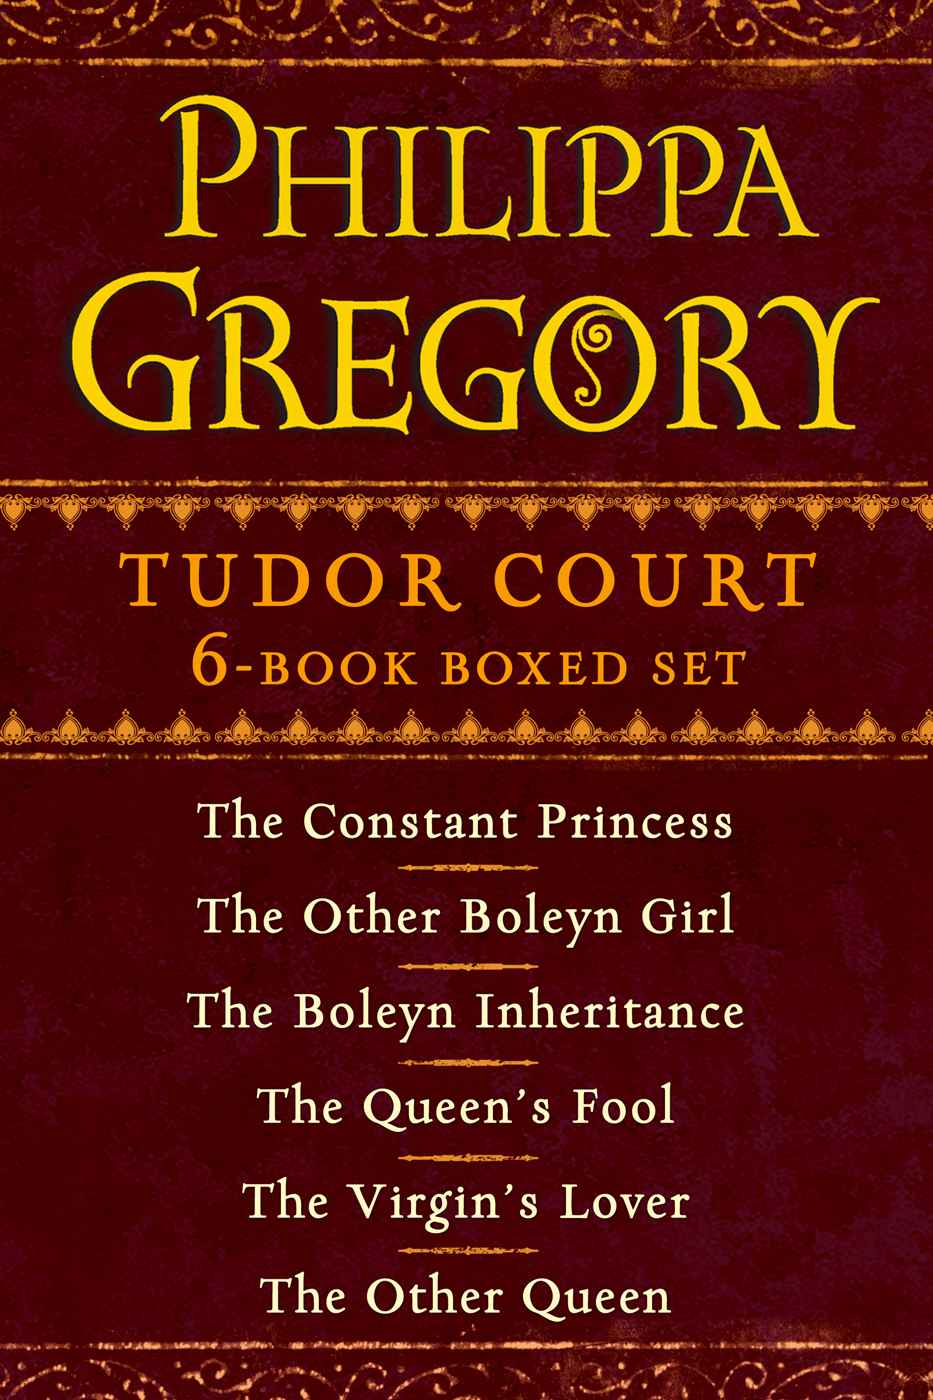 Philippa Gregory's Tudor Court 6-Book Boxed Set by Philippa Gregory